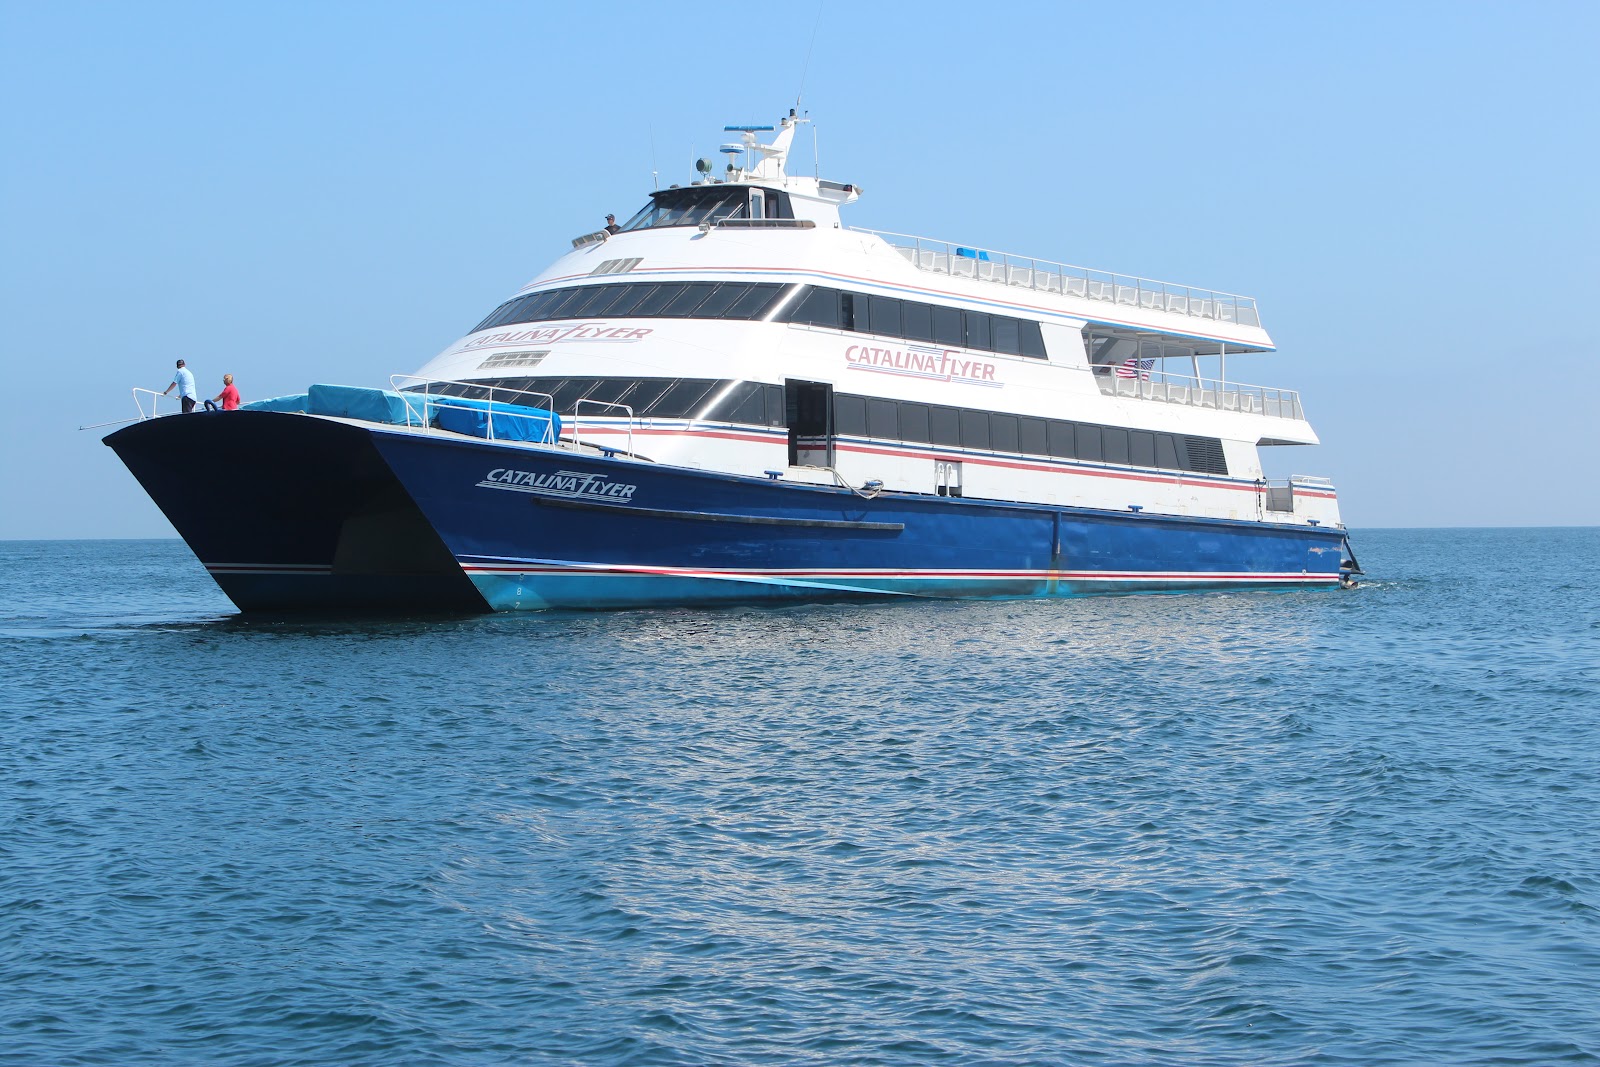 Download this Catalina Island Ferry picture